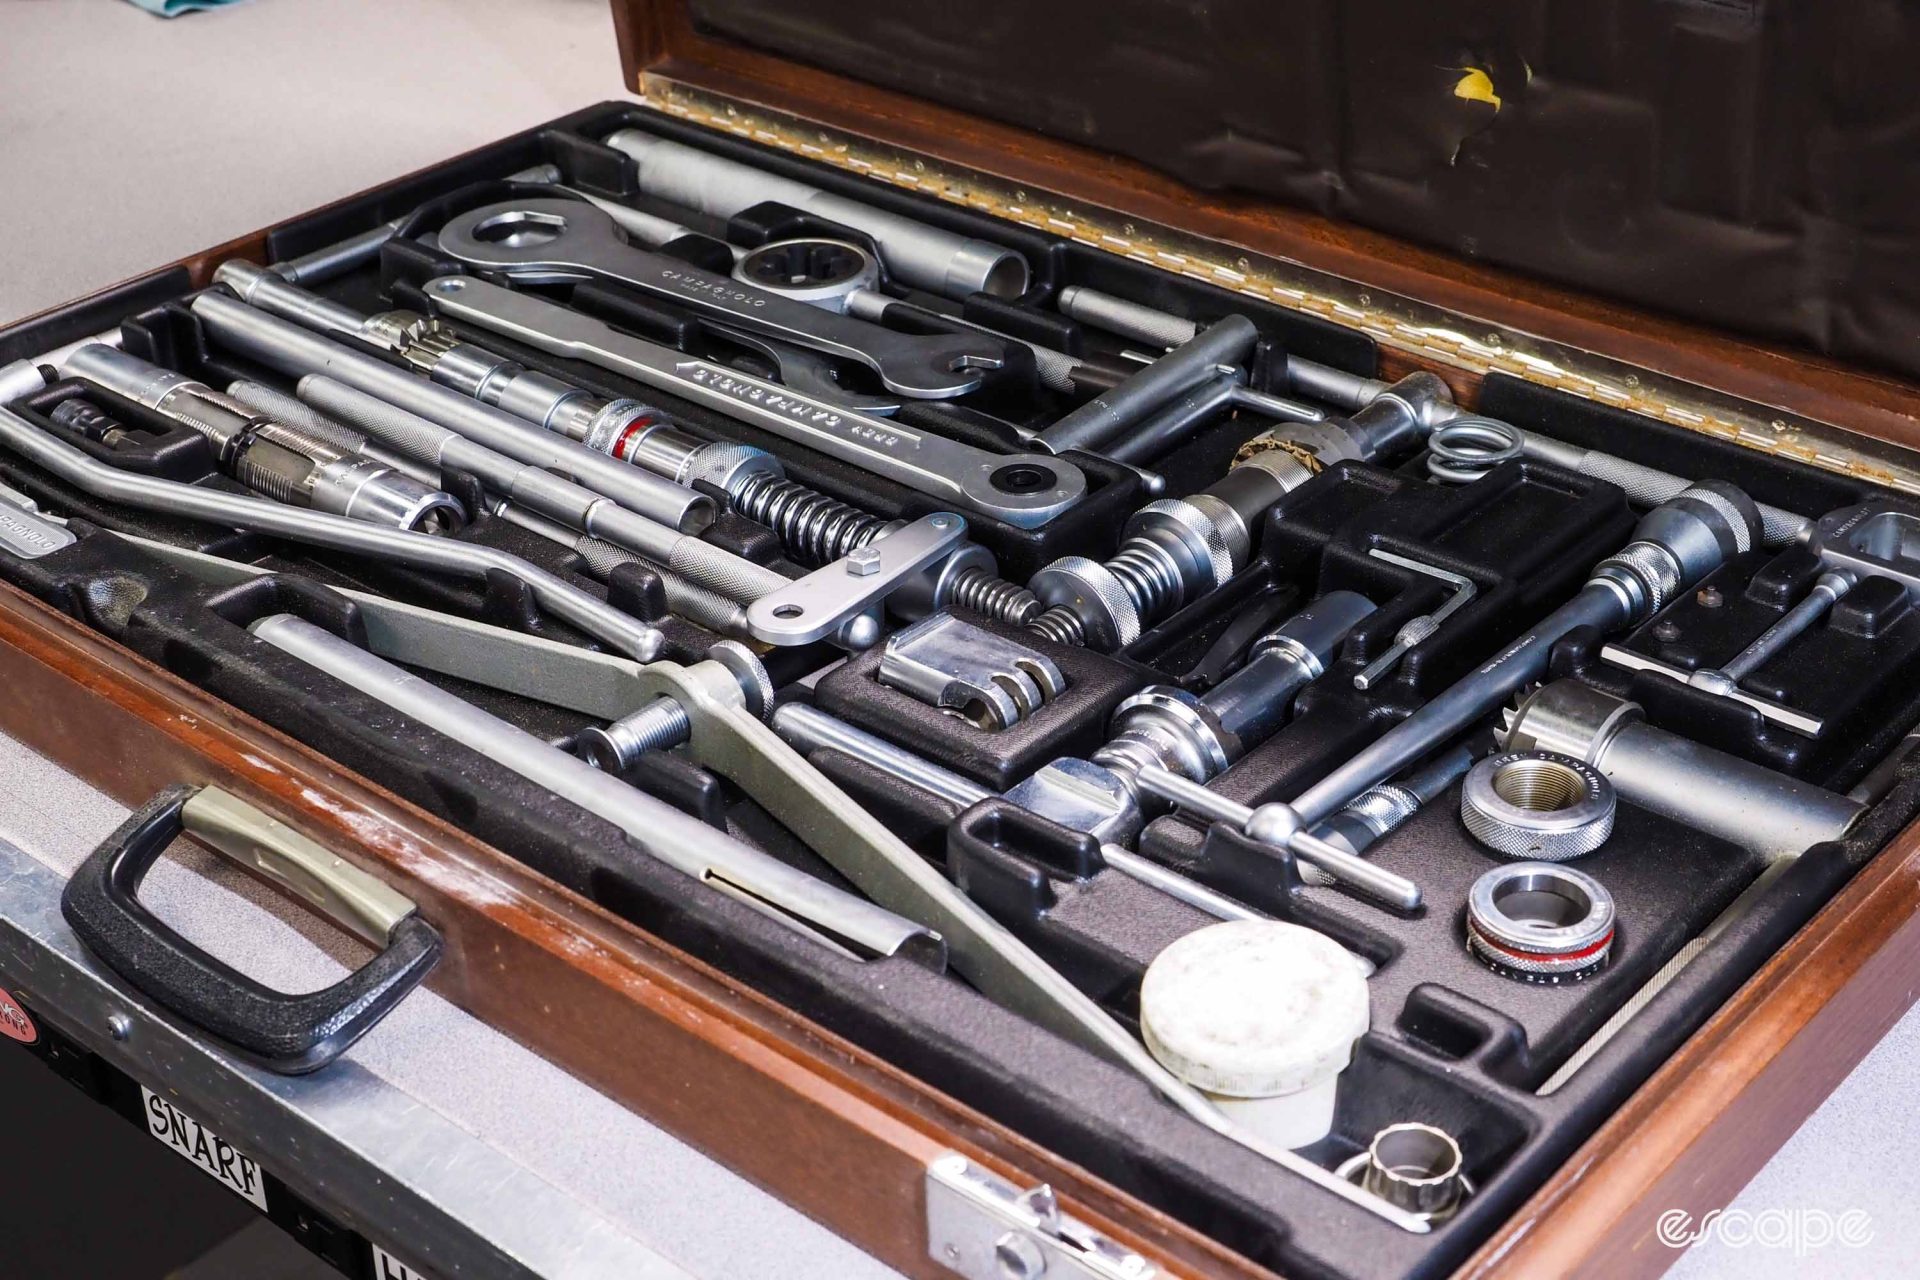 Campagnolo tool kit open